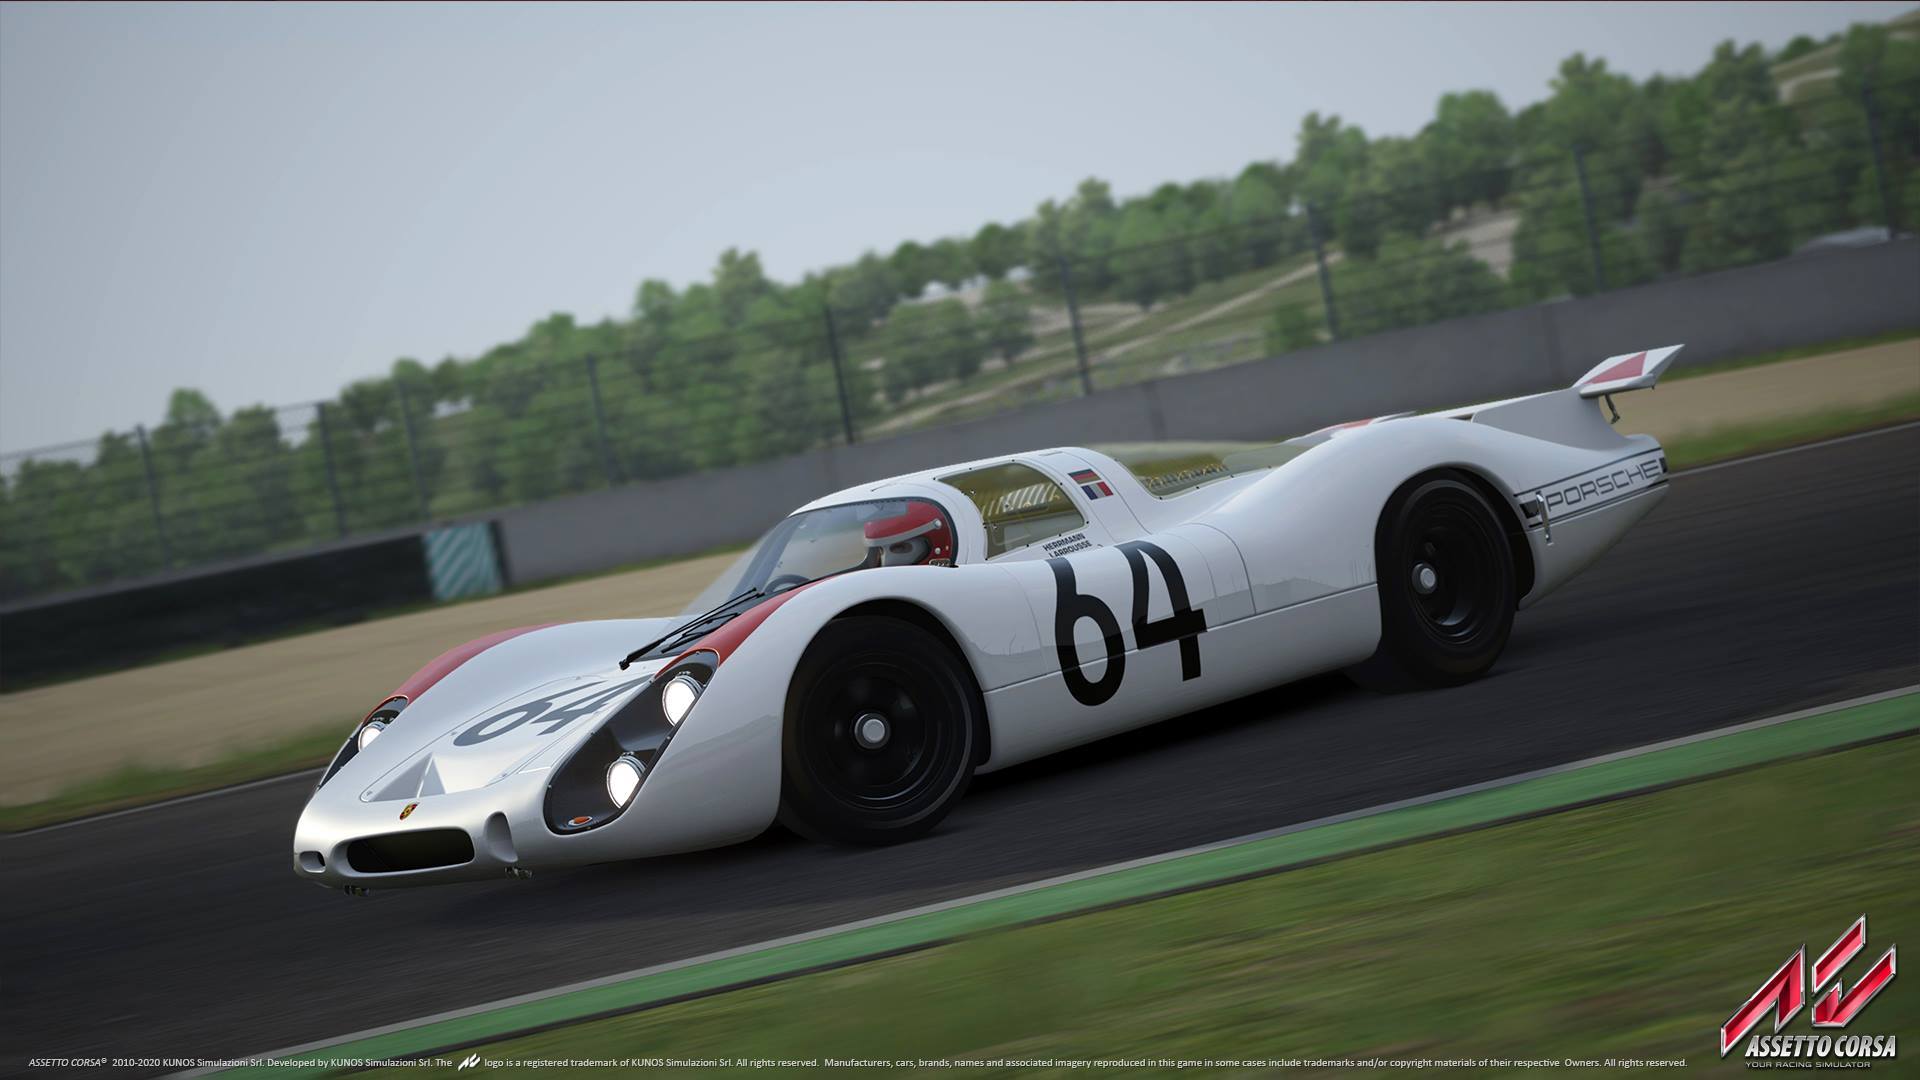 Buy Assetto Corsa - Porsche Pack III from the Humble Store